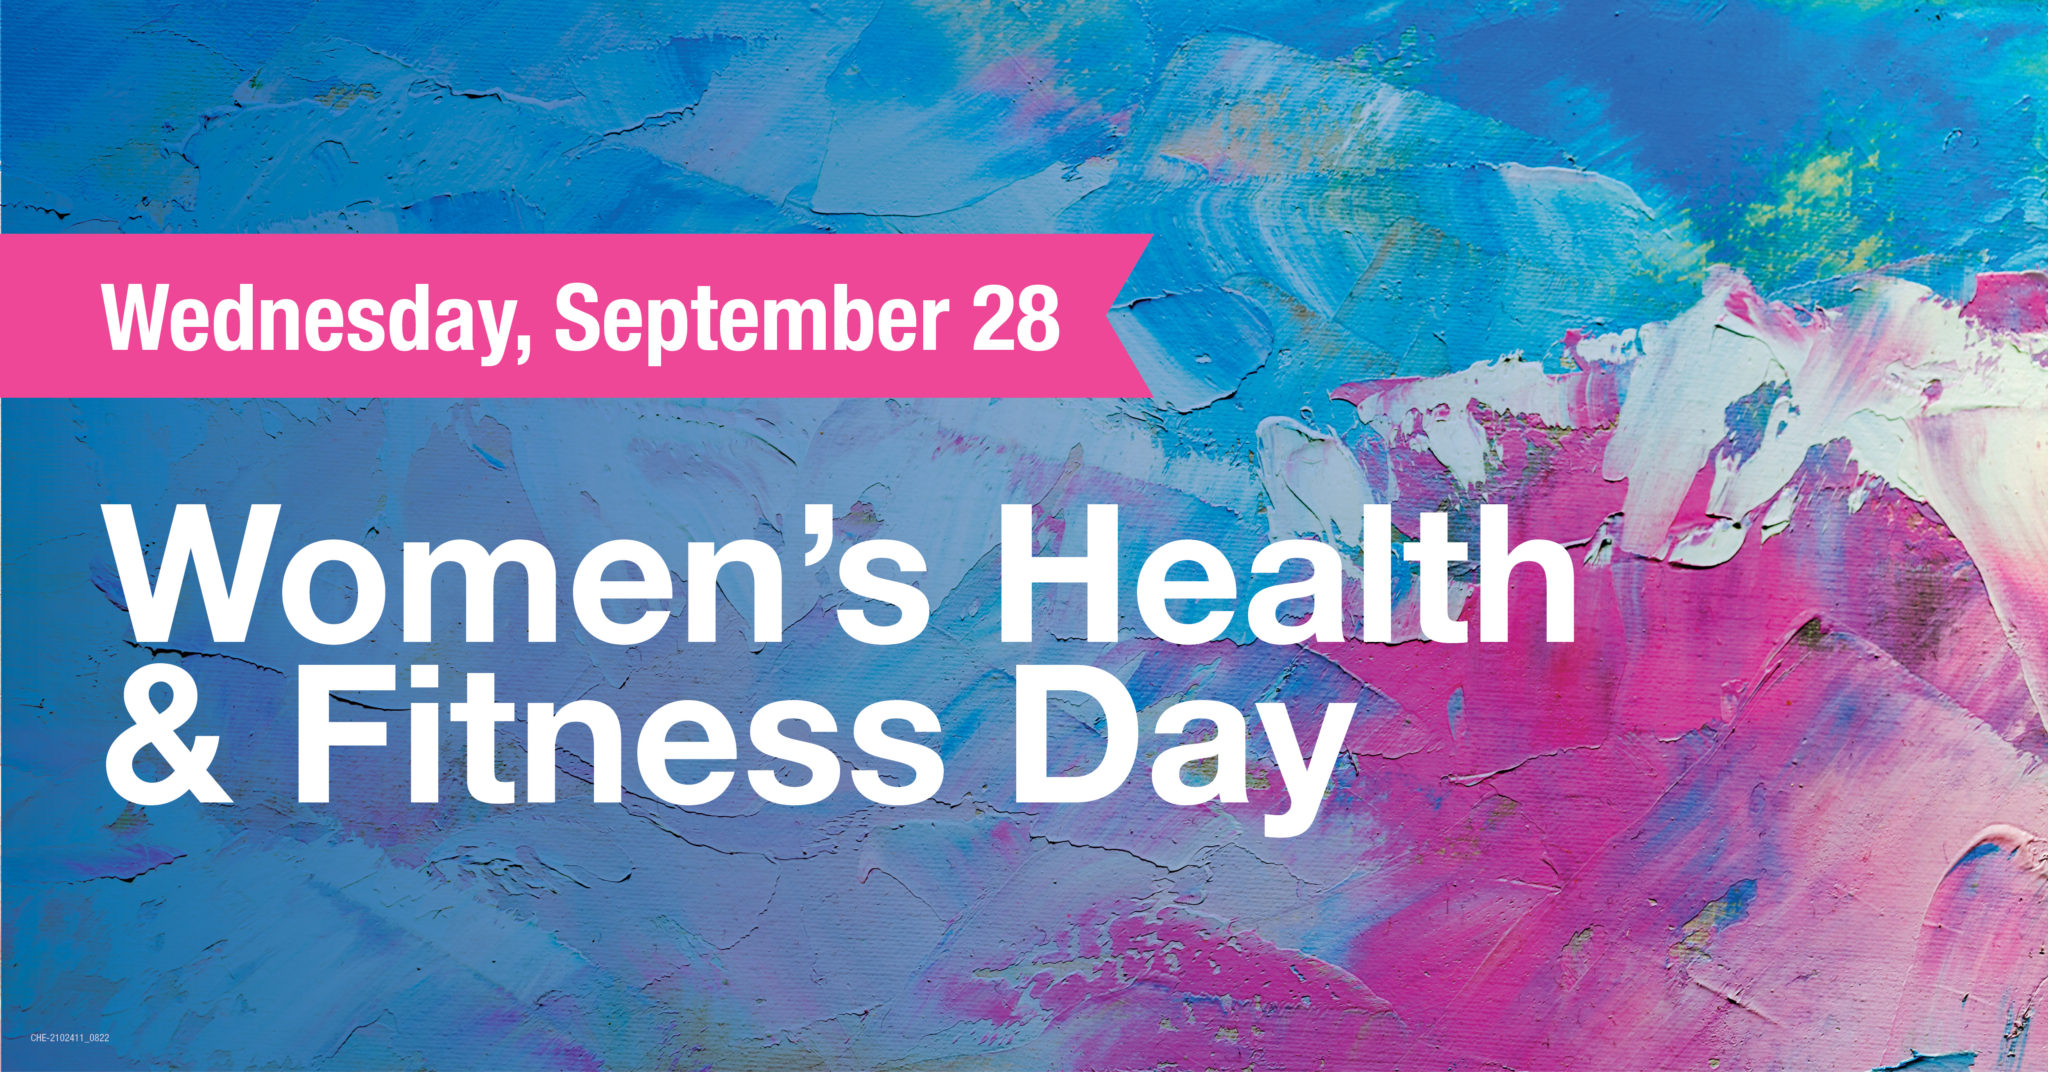 Women’s Health and Fitness Day: Take Time for Yourself and Your Health